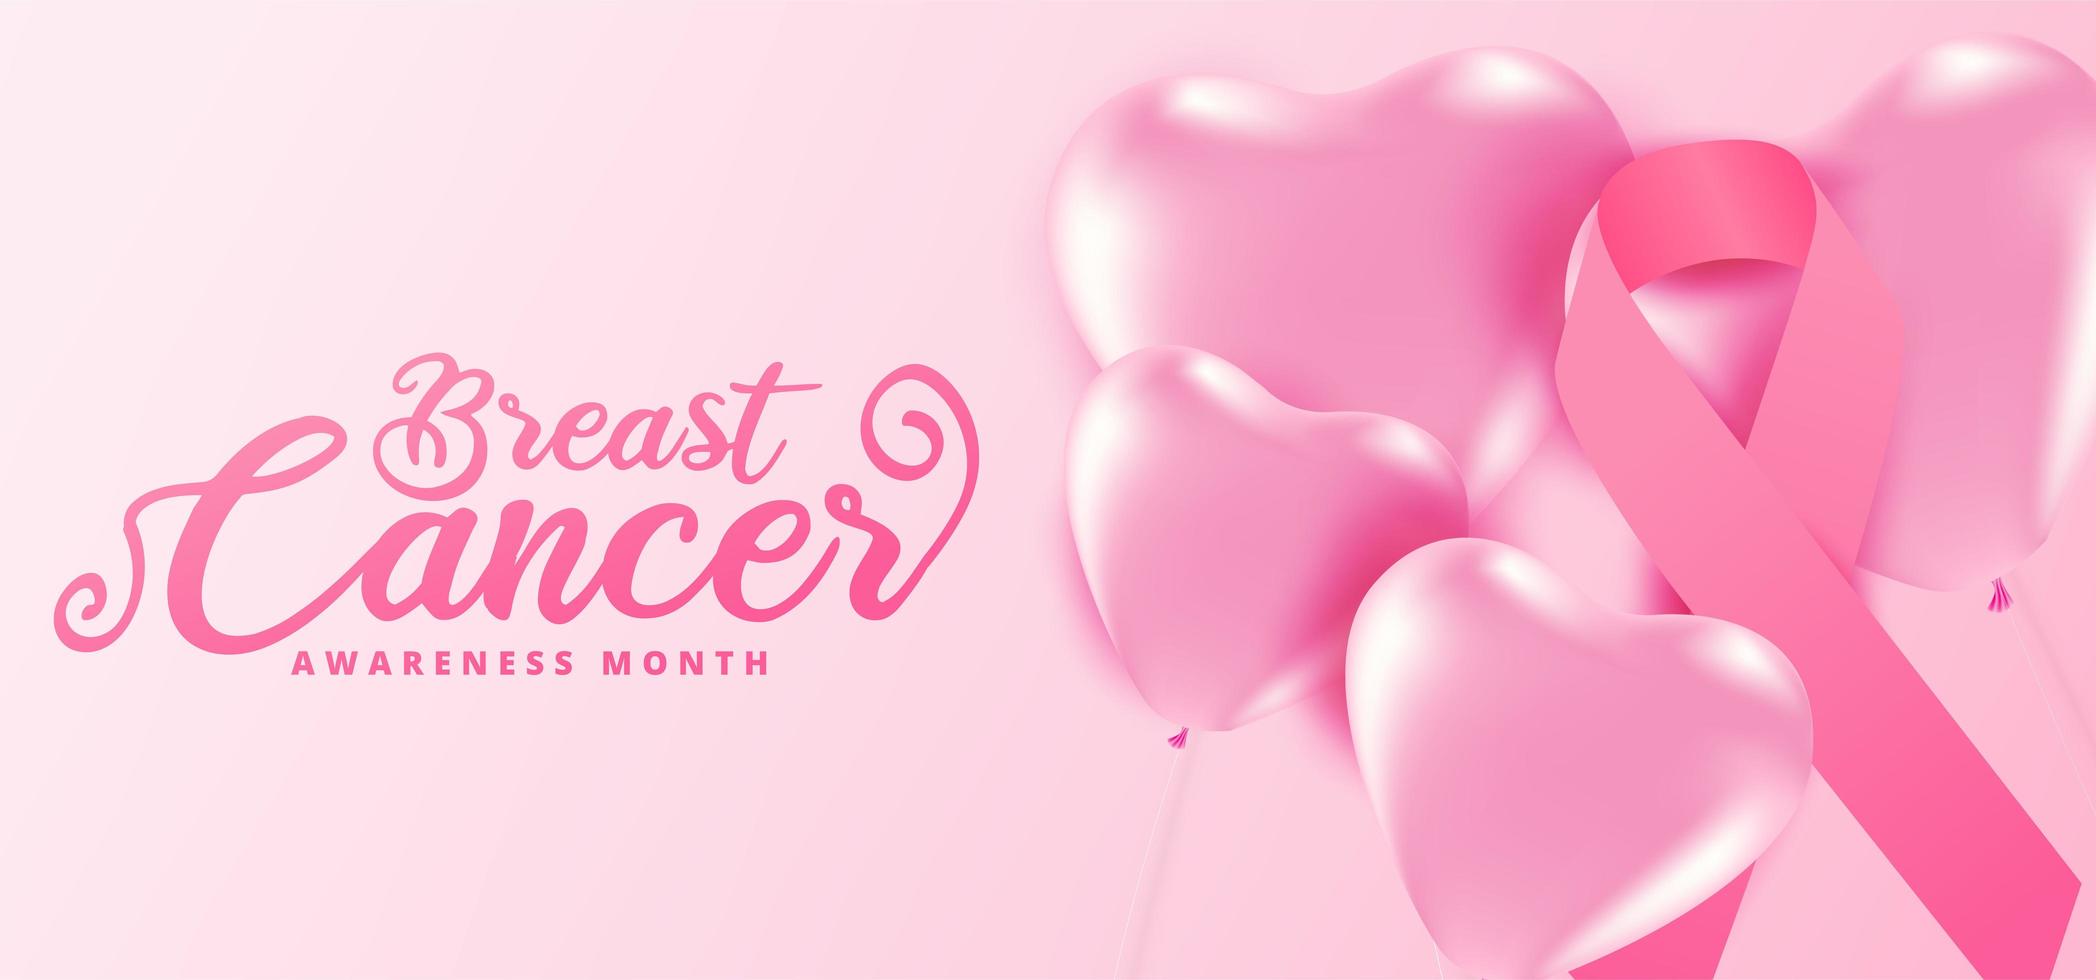 Breast cancer awareness month heart pink balloons  vector